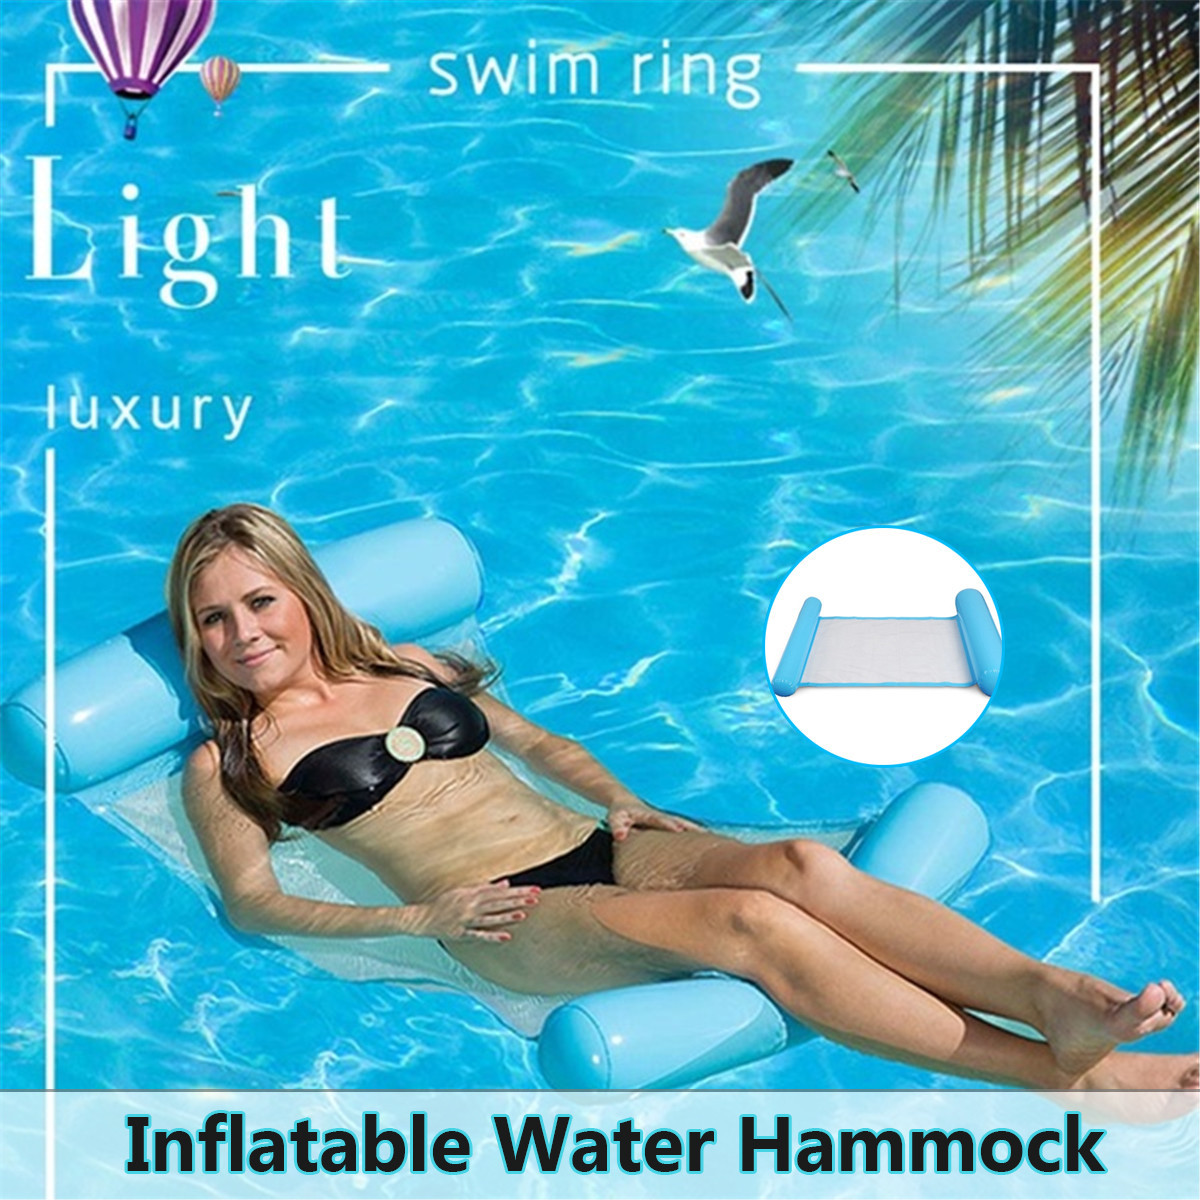 Clip Net Hammock Foldable Inflatable Backrest Floating Bed Row Water Play Lounge Chair 39